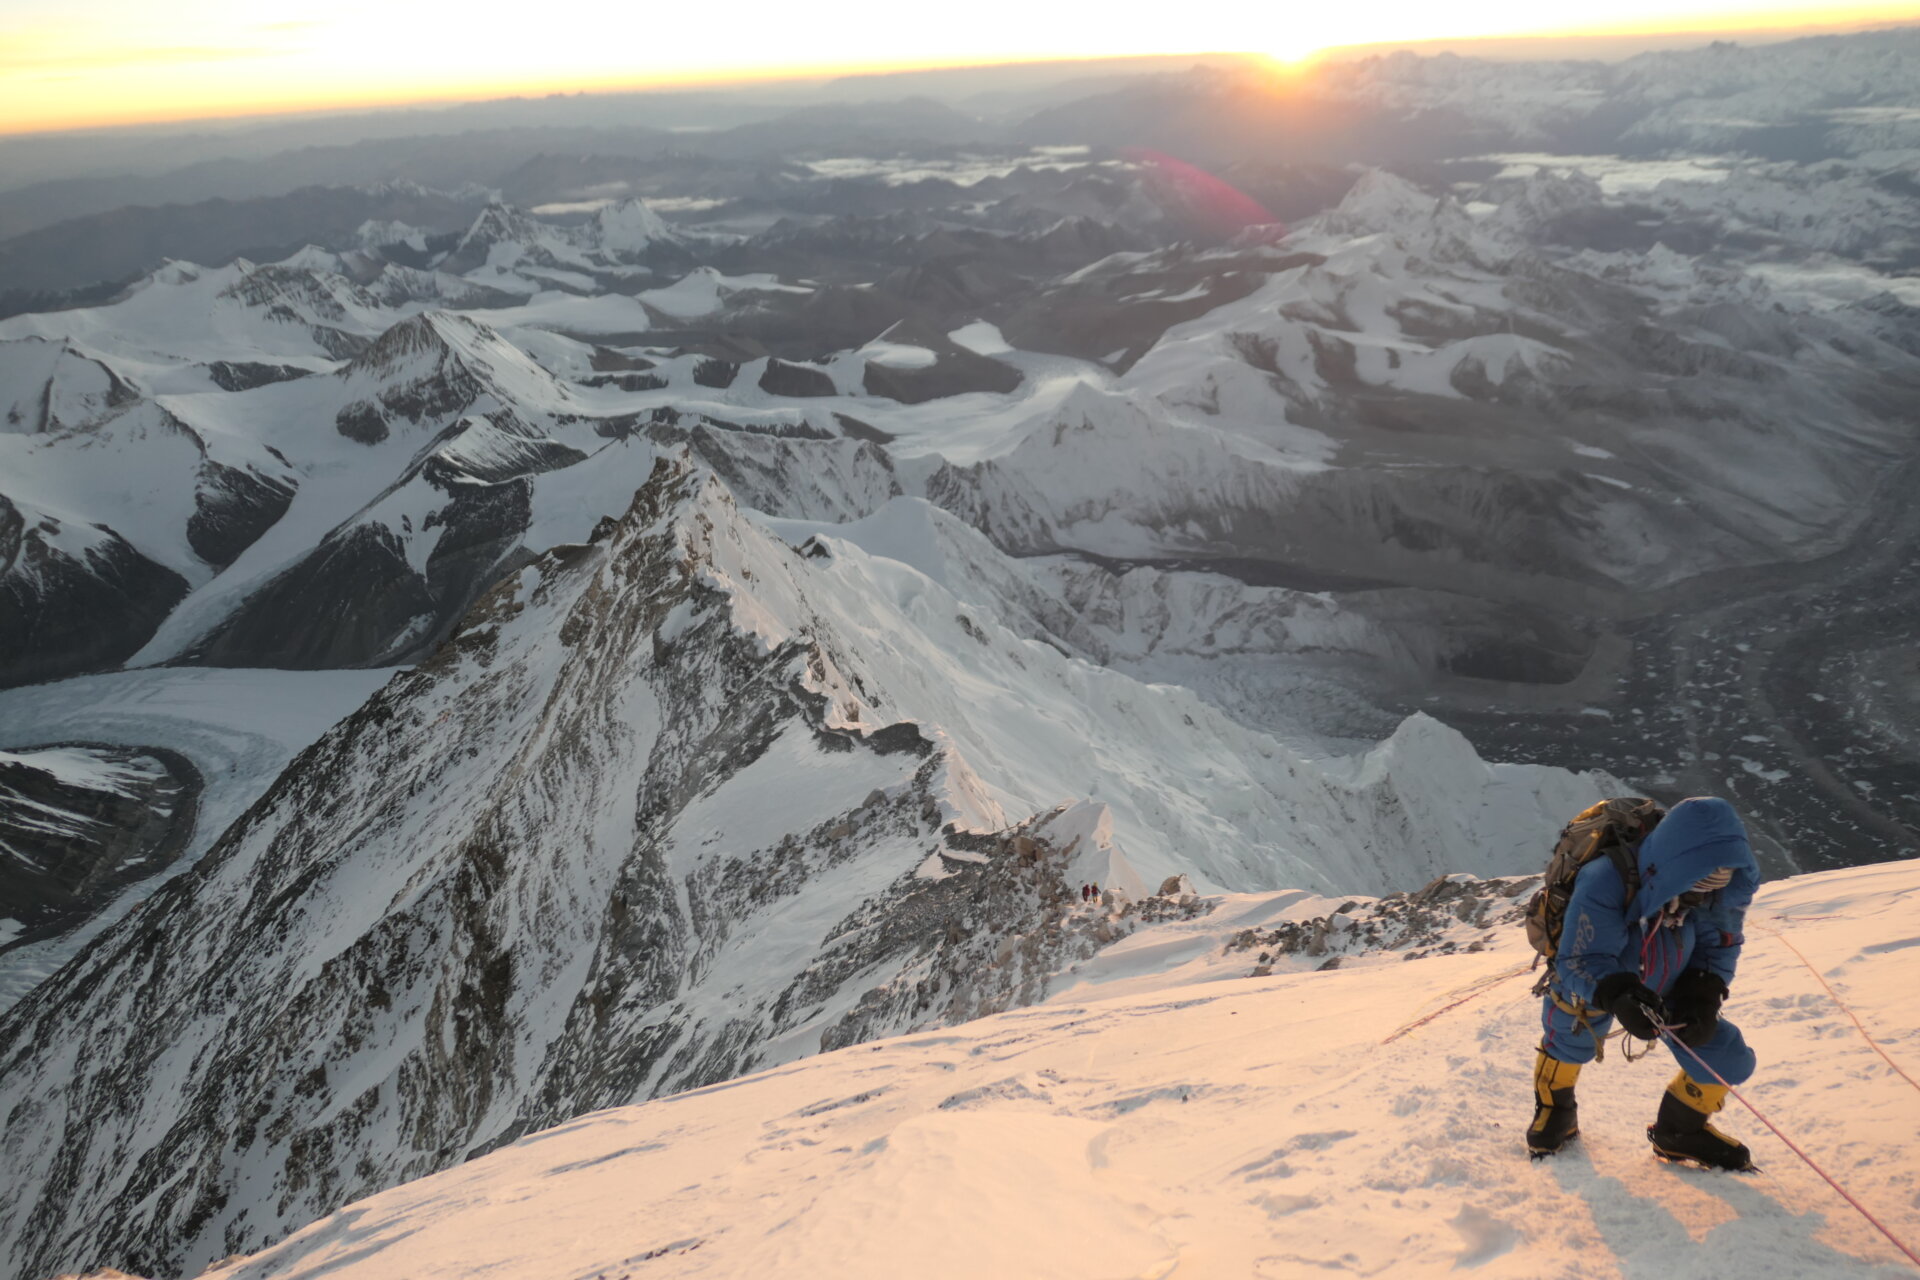 Topo Mena climbing toward the summit of Mt. Everest with the sun rising behind him over the Himalaya.